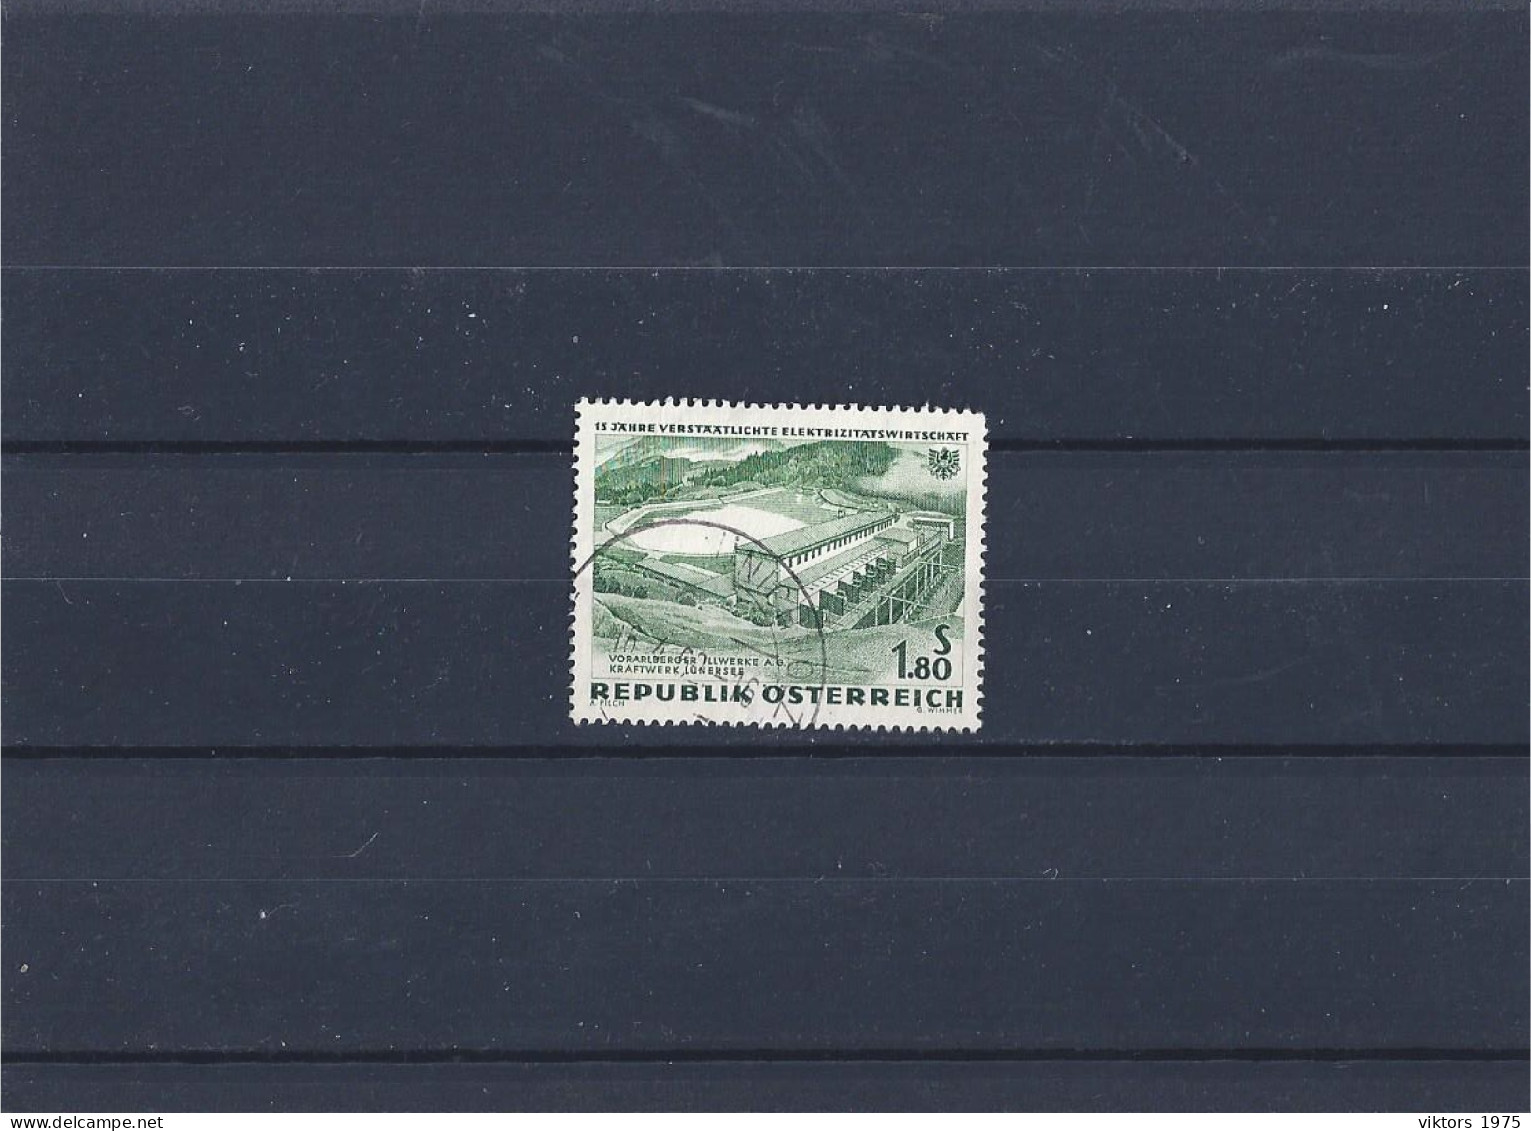 Used Stamp Nr.1105 In MICHEL Catalog - Used Stamps